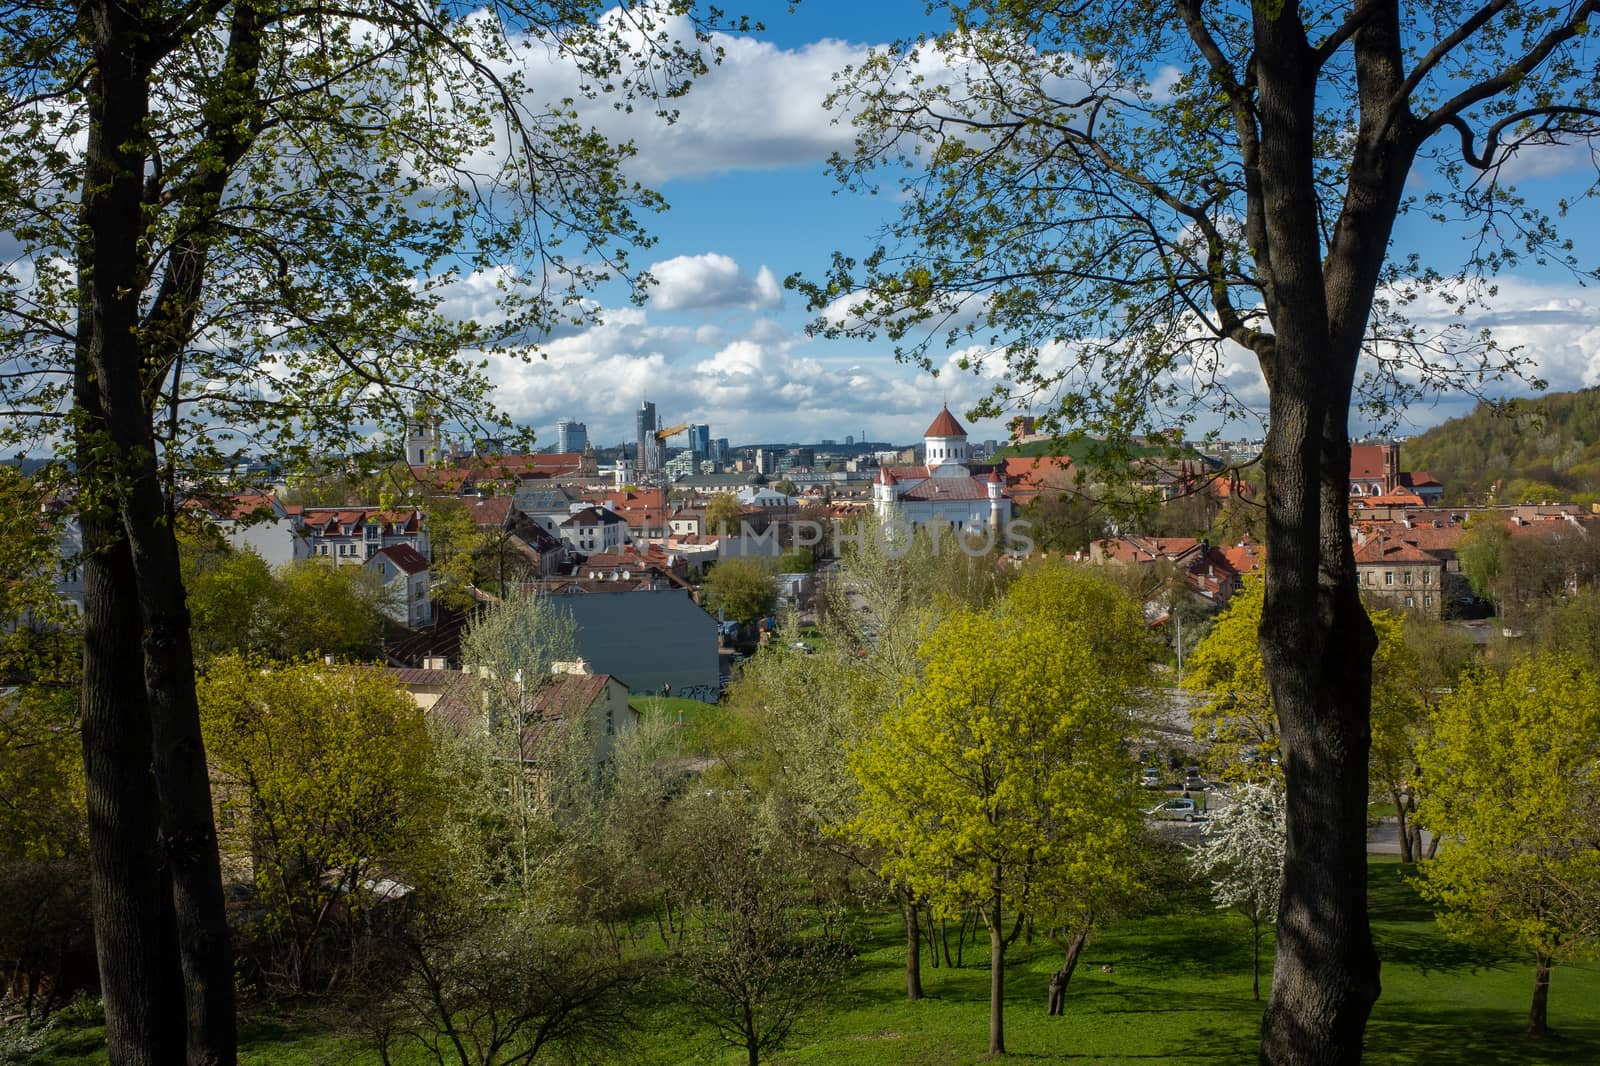 April 27, 2018 Vilnius, Lithuania, View of the old city of Vilnius from the top point.